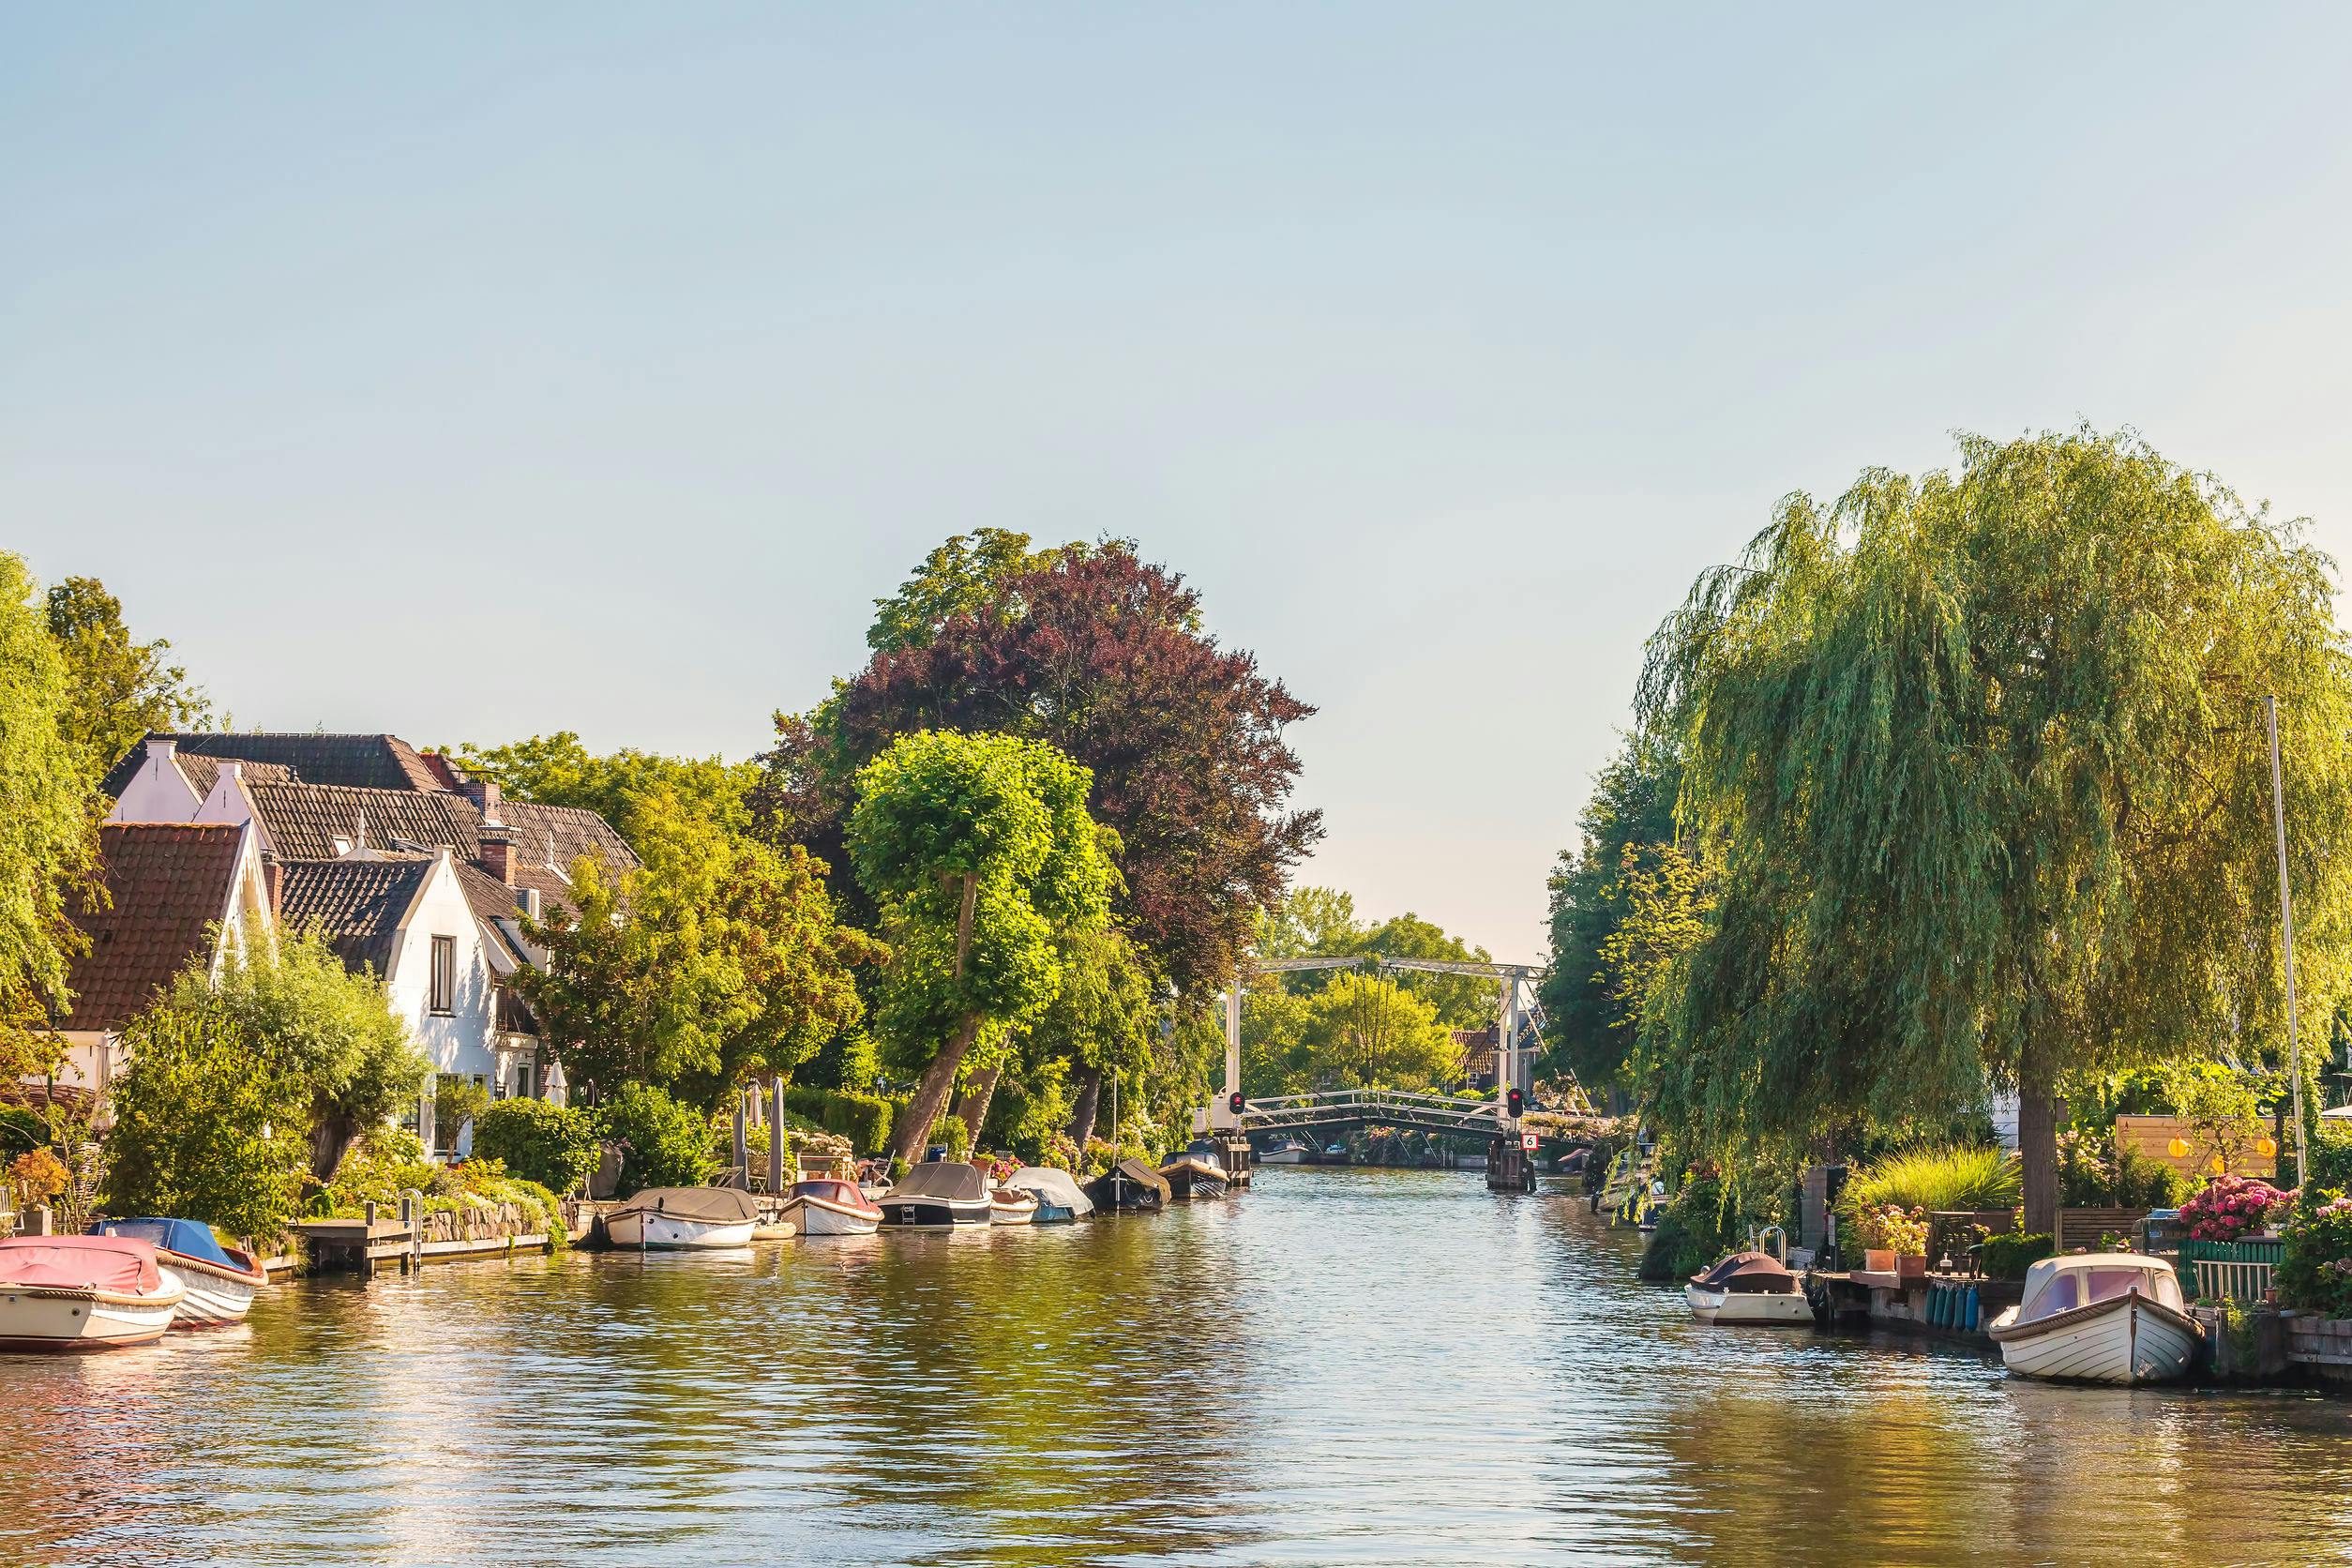 Private afternoon high tea cruise on Vecht River from Amsterdam